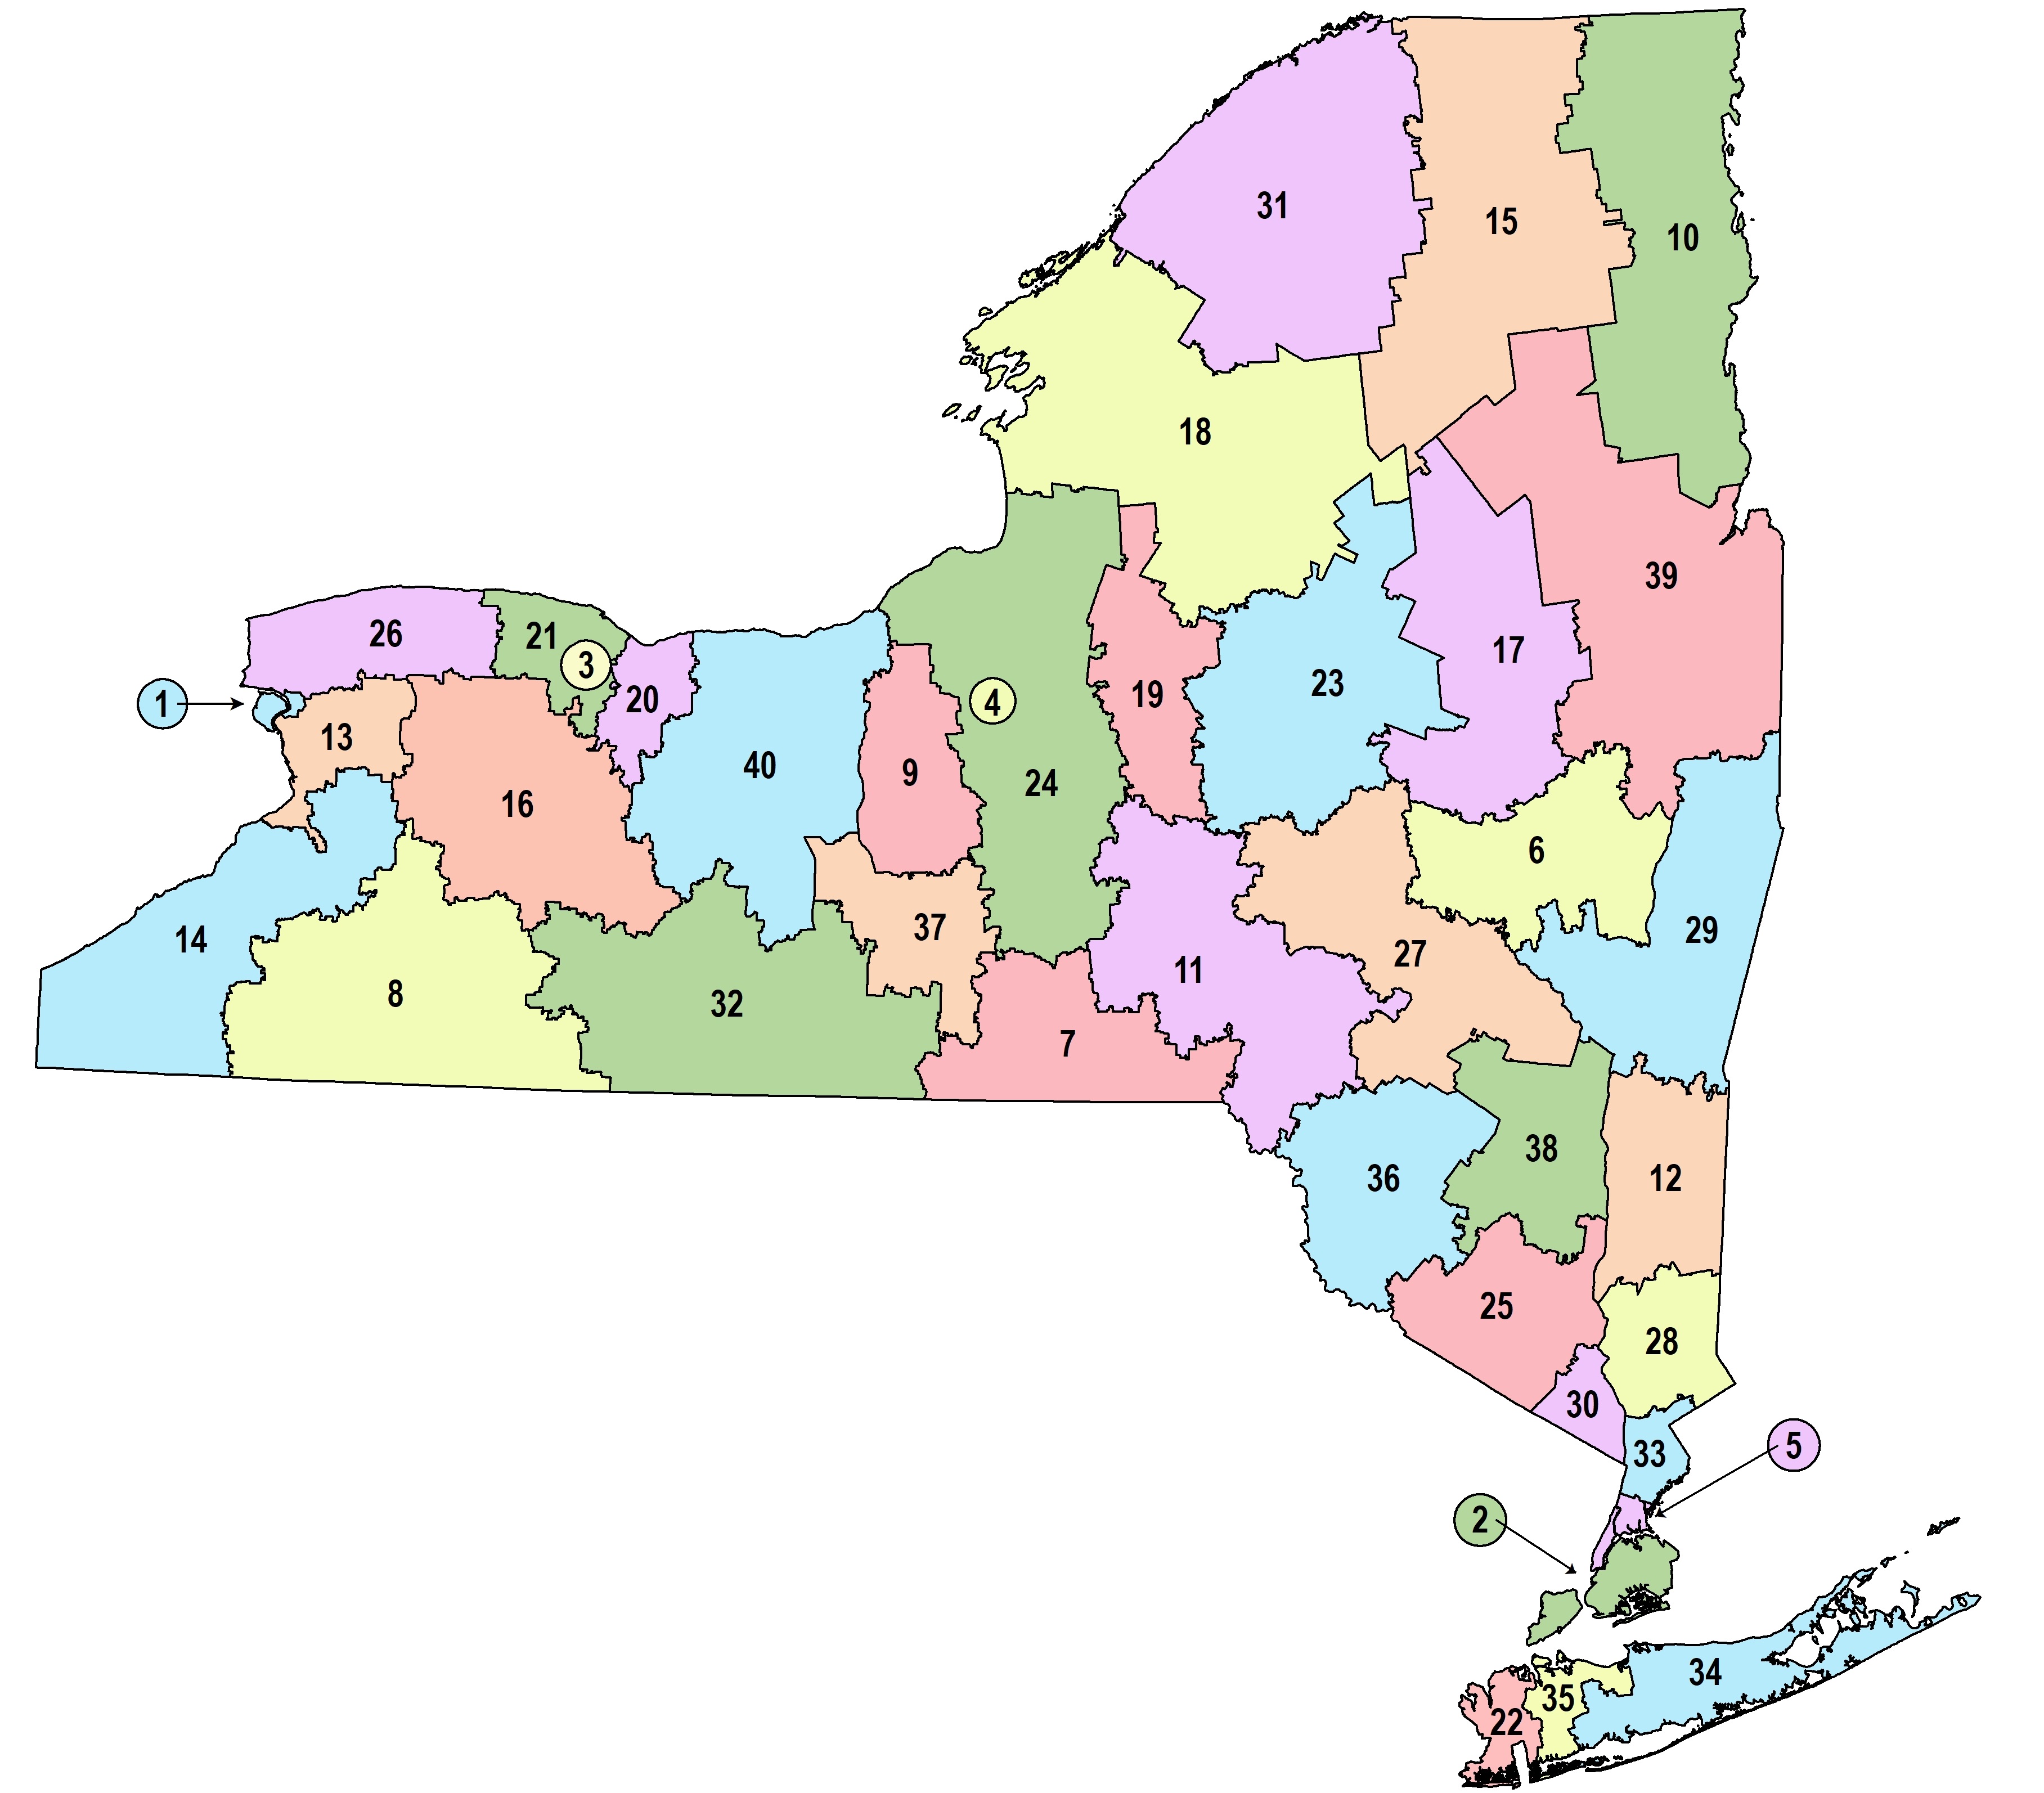 Image map of school library systems in New York State; click on the image to go to the map